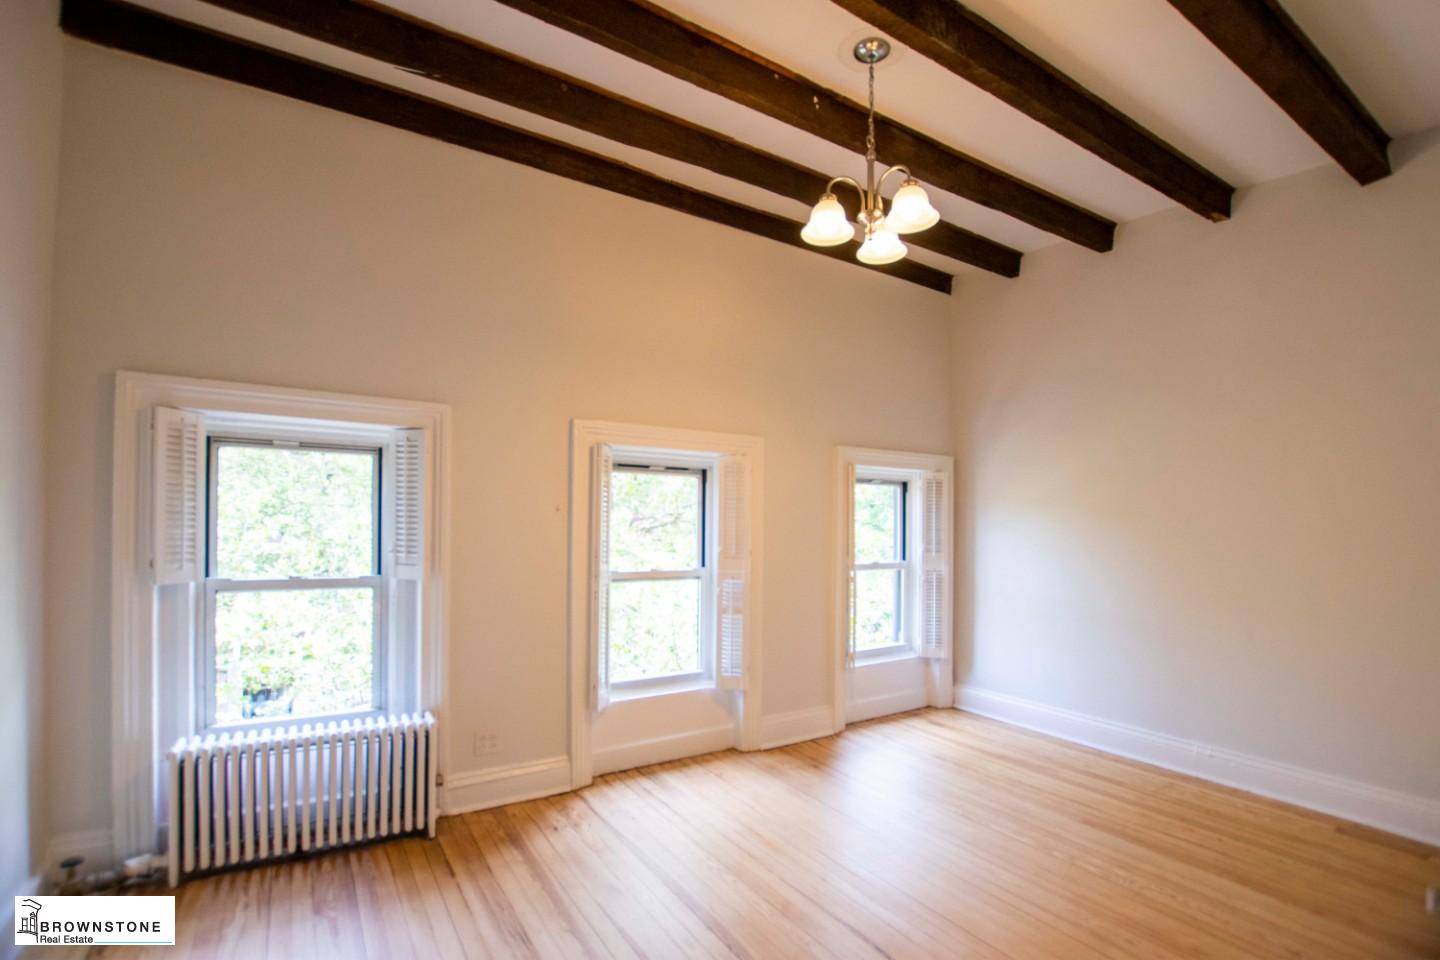 Carroll Gardens Two Bedroom Upper Duplex Newly RenovatedLocated in prime Carroll Gardens on beautiful tree lined Sackett Street, this bright and airy gem features a private entry with staircase leading ...